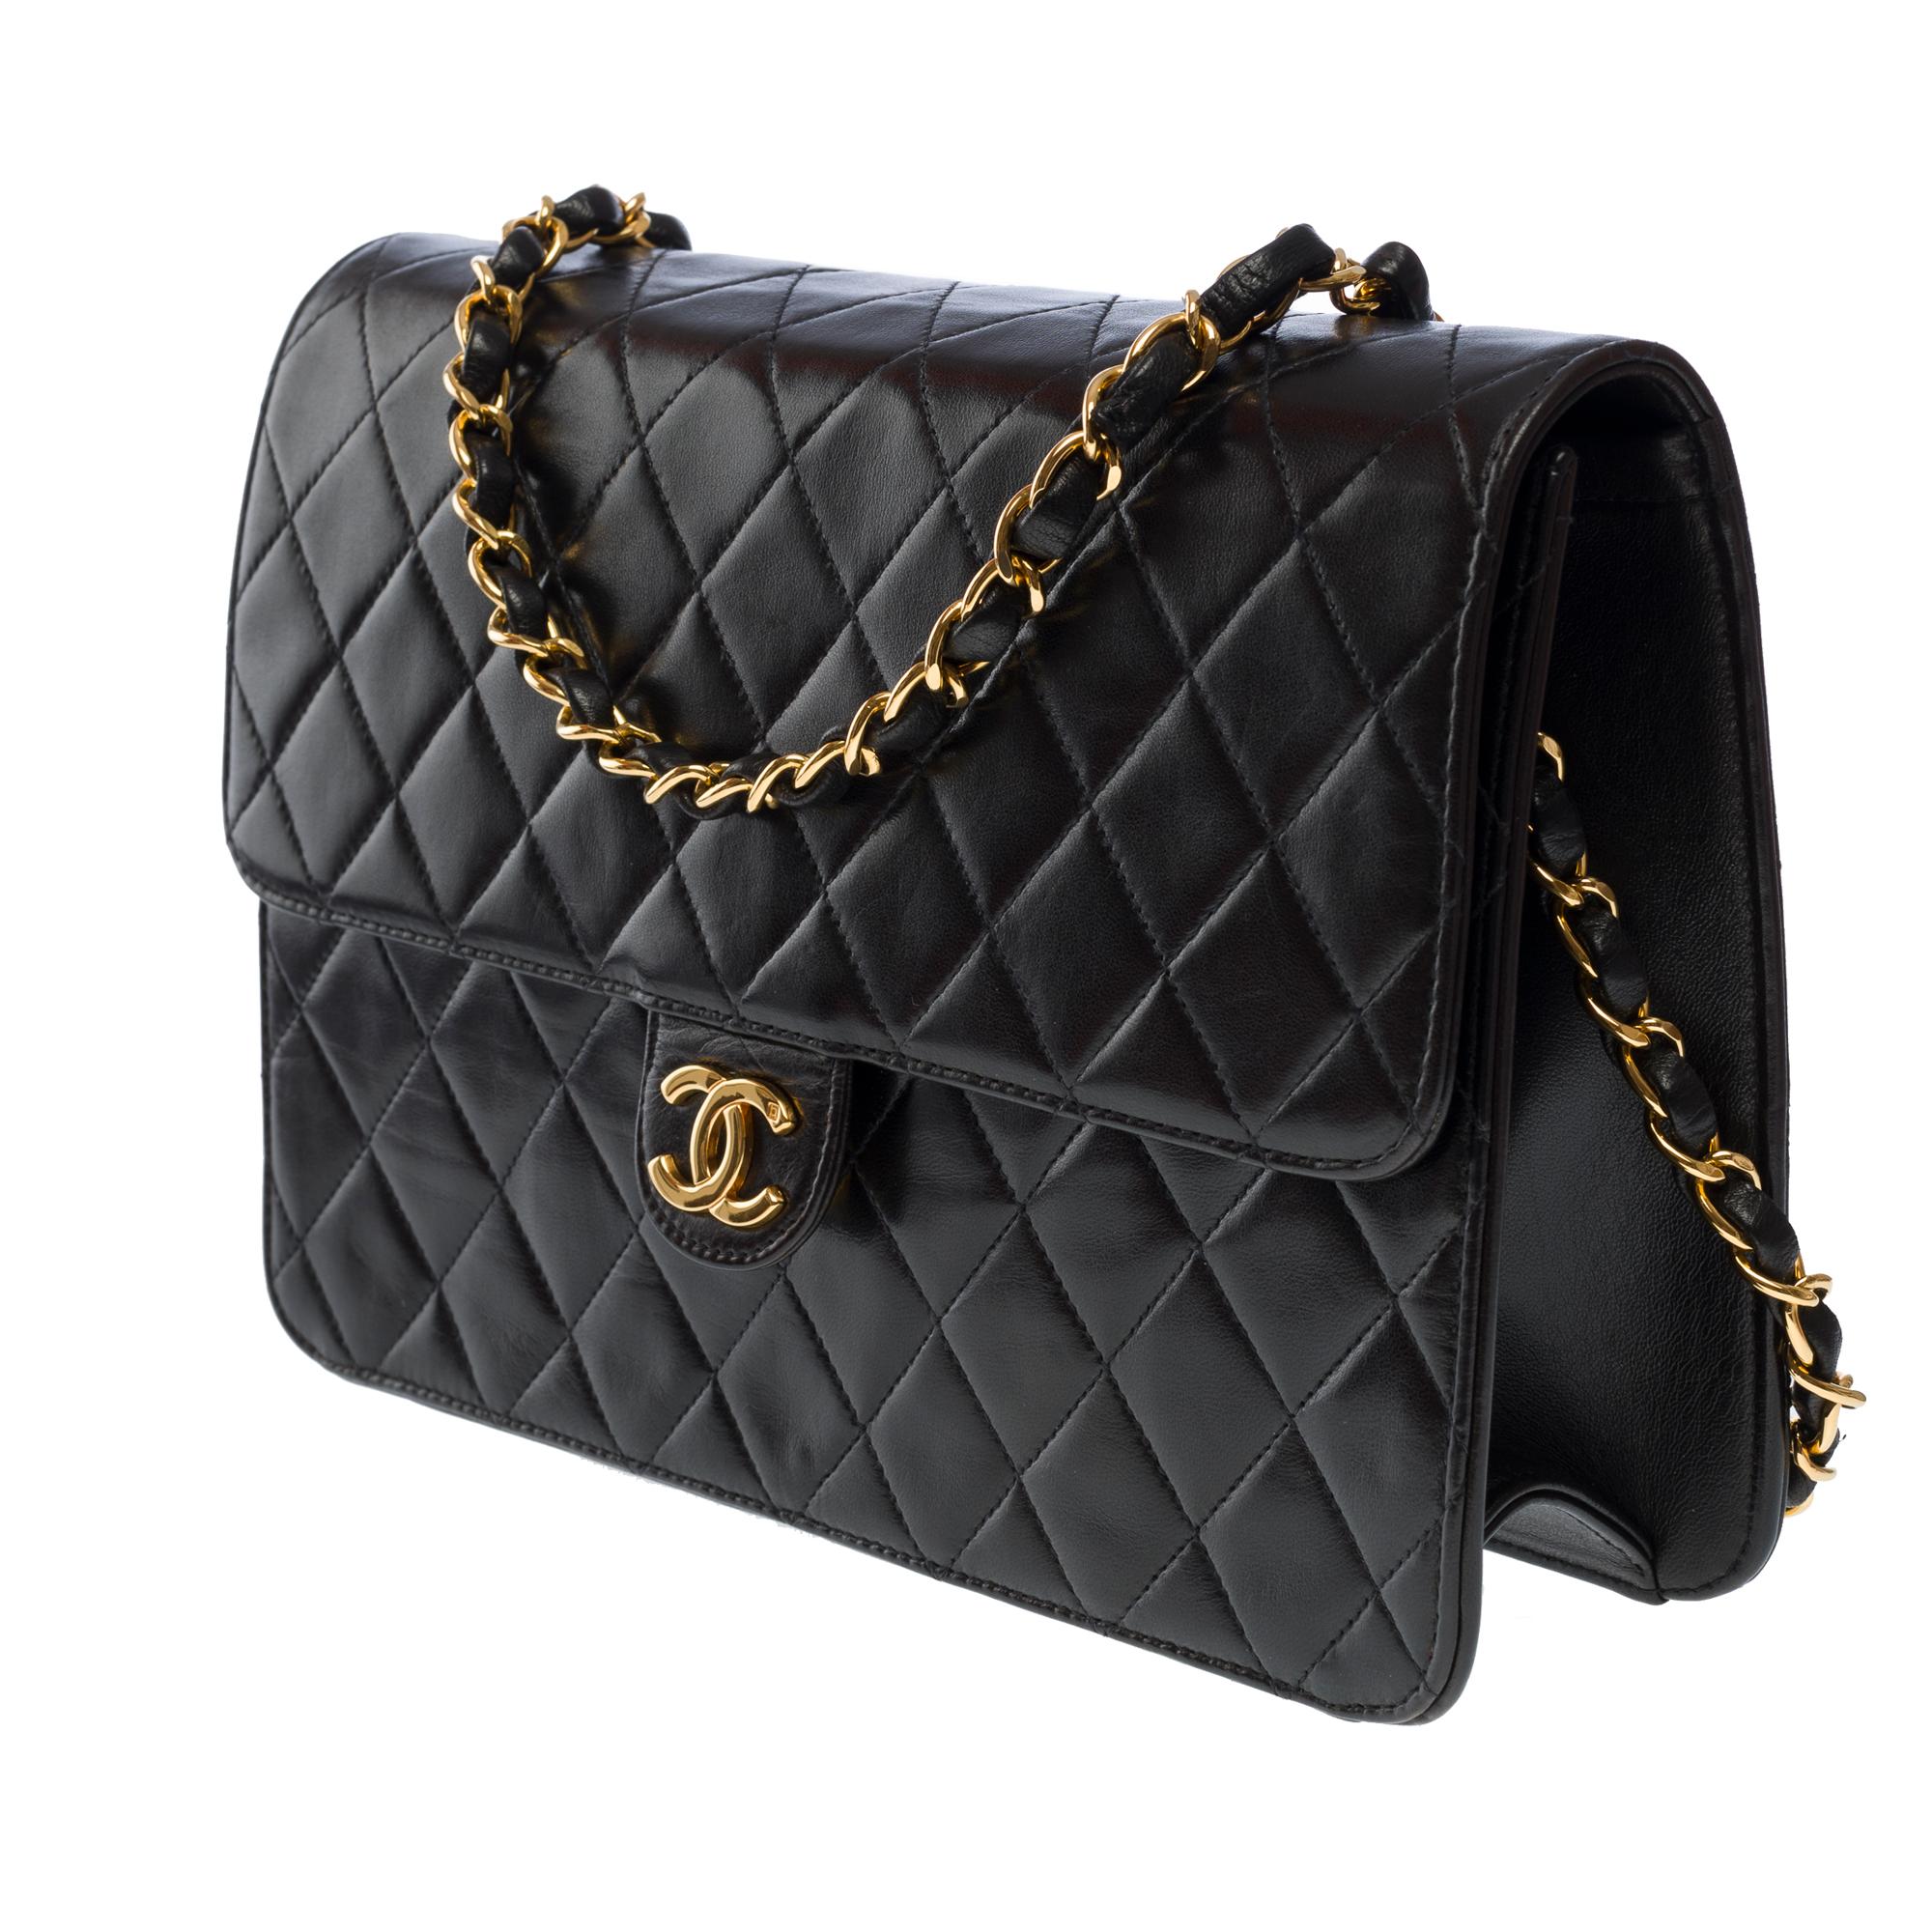 Women's Gorgeous Chanel Classic shoulder flap bag in black quilted lambskin leather, GHW